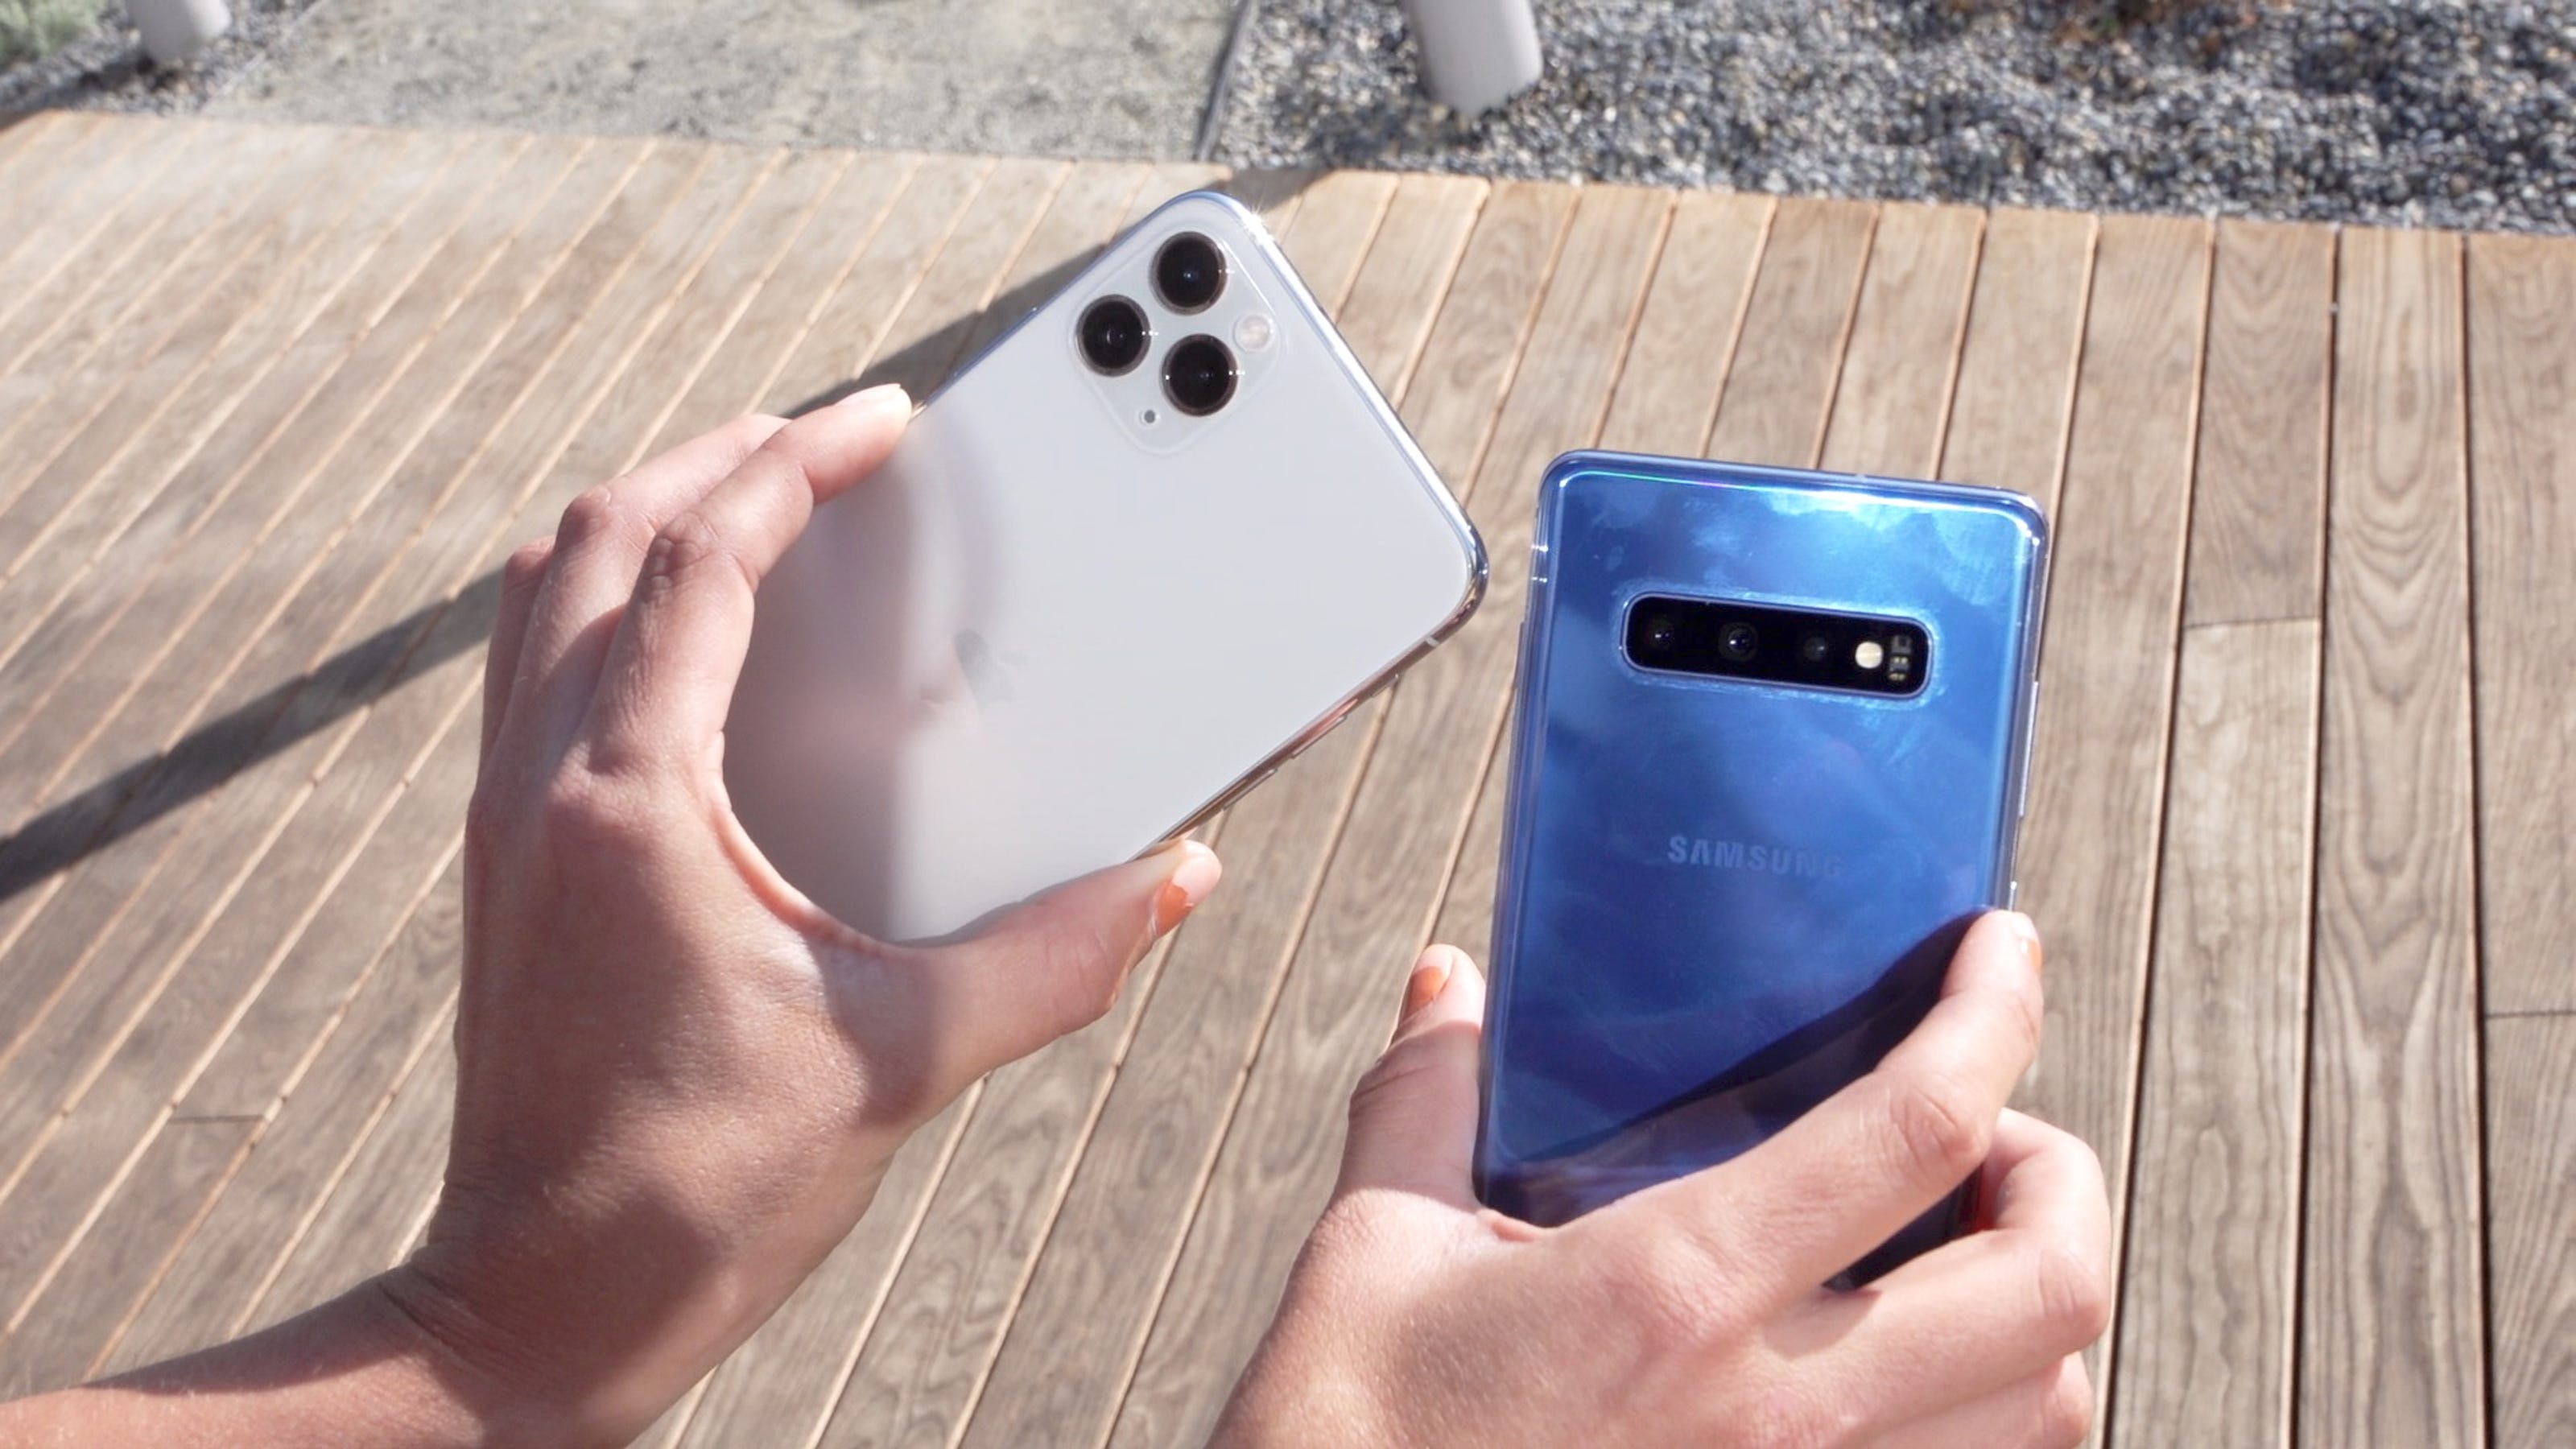 Samsung Galaxy S10+ vs. iPhone 11 Pro Max: Who has the better camera?